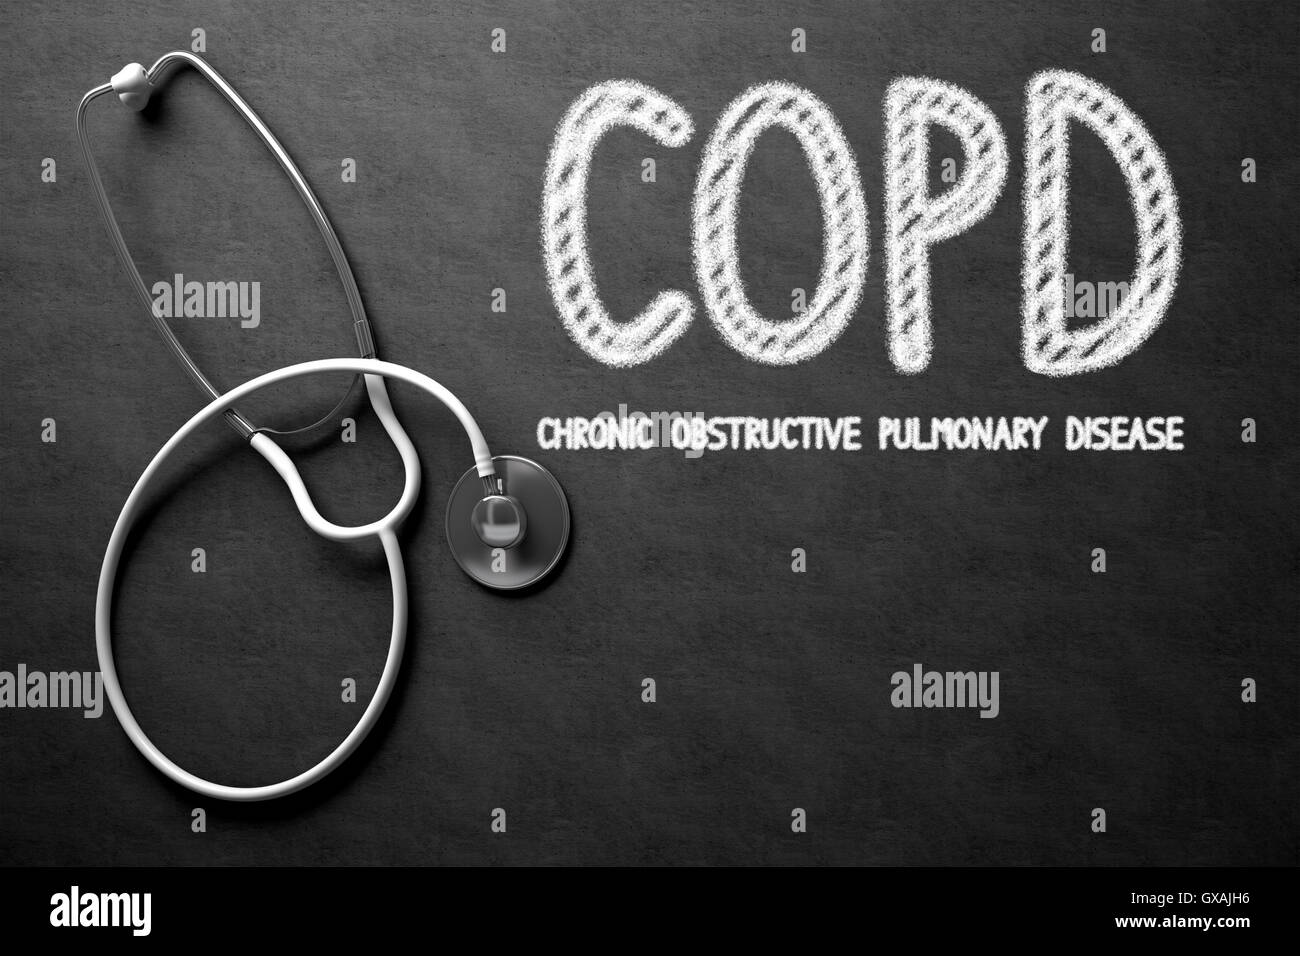 COPD Concept on Chalkboard. 3D Illustration. Stock Photo